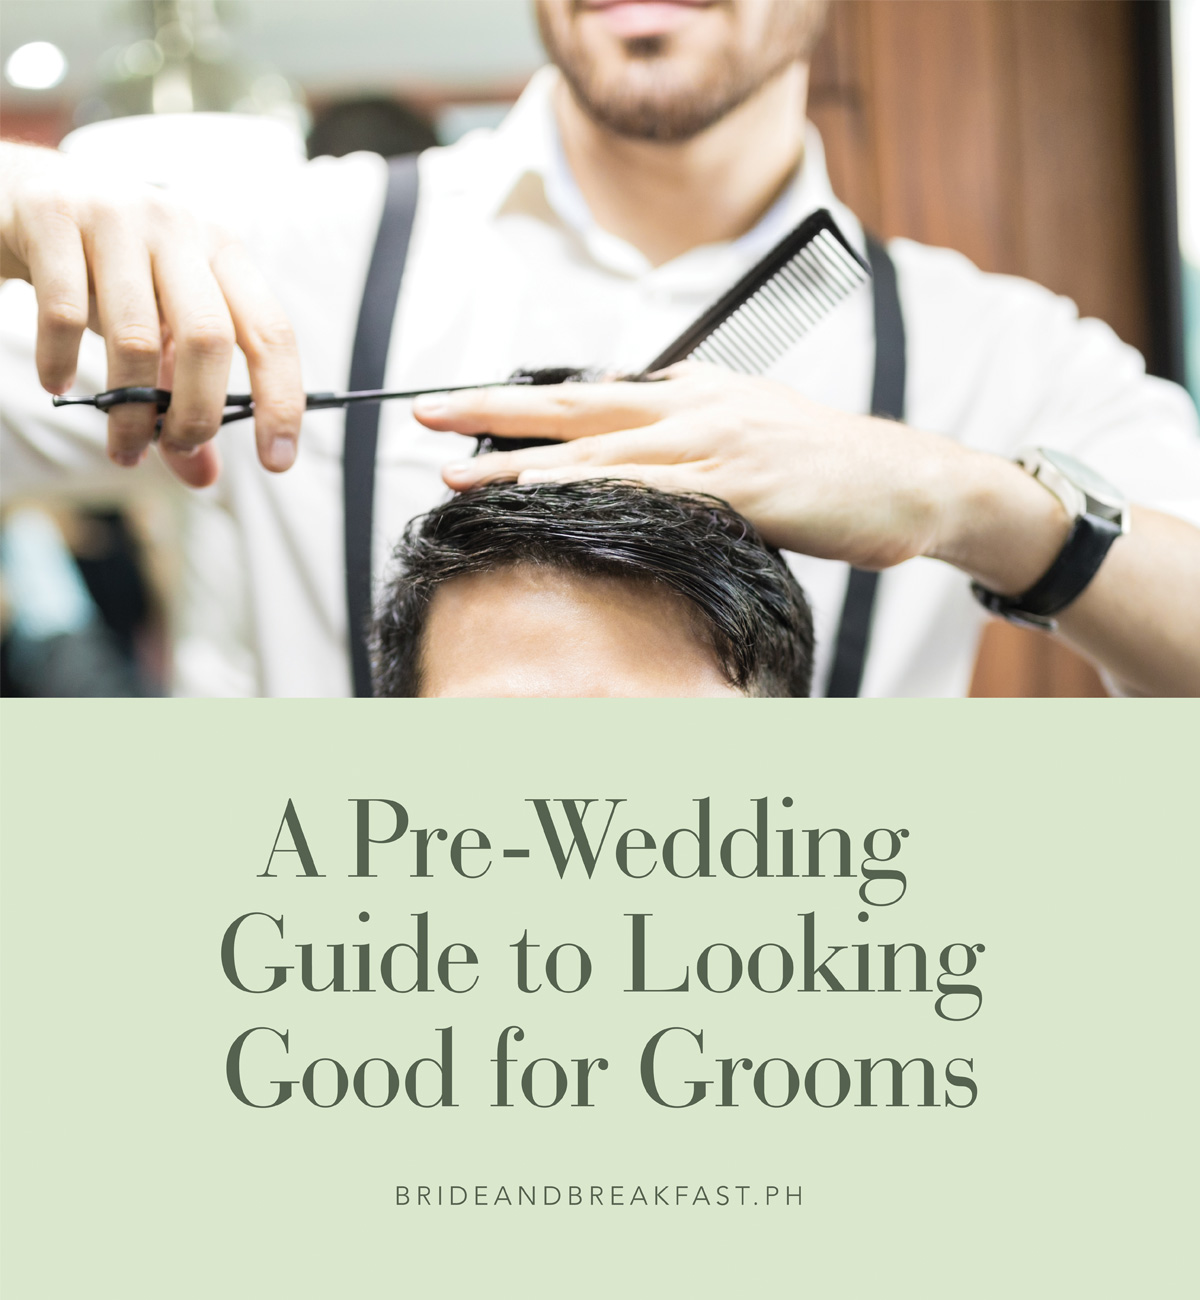 A Pre-Wedding Guide to Looking Good for Grooms